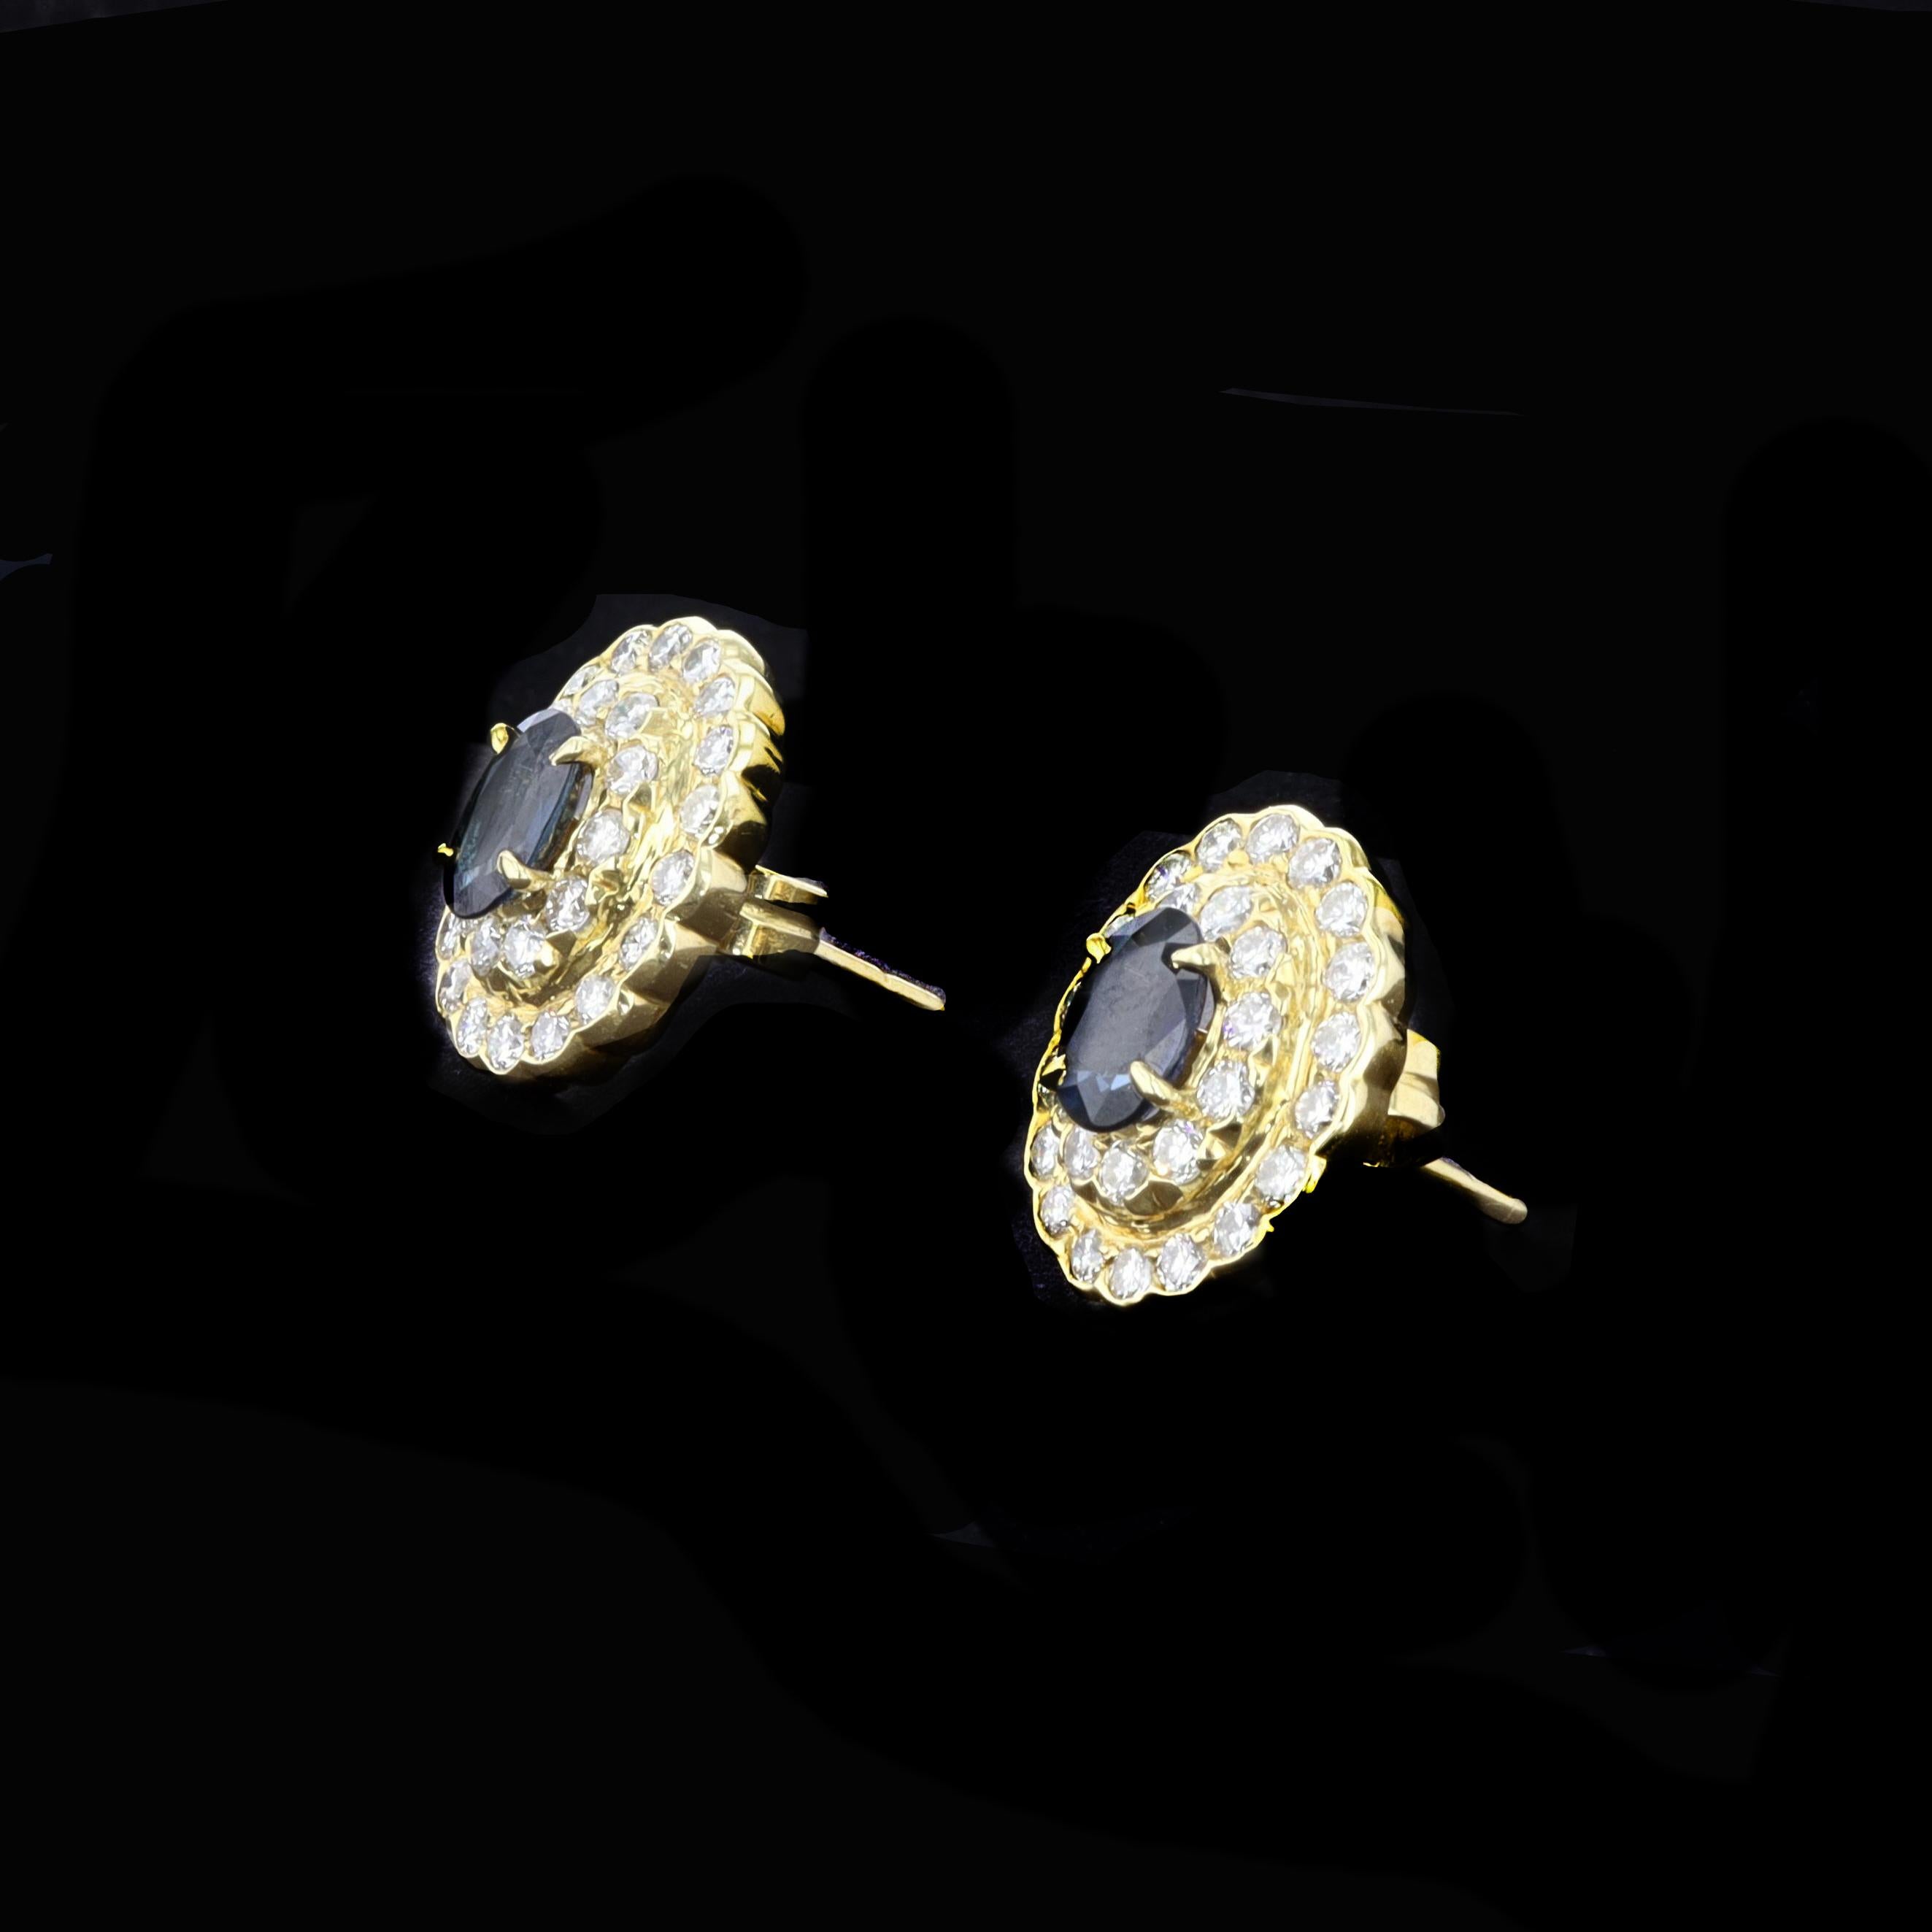 A double halo of 56 round diamonds accents a vivid blue sapphire in this pair of charming on the ear 18K yellow gold earrings. The two oval sapphires weigh 2.35 TWT ctw, and 56 Round Brilliant Diamonds weigh 1.50 TWT ctw.

